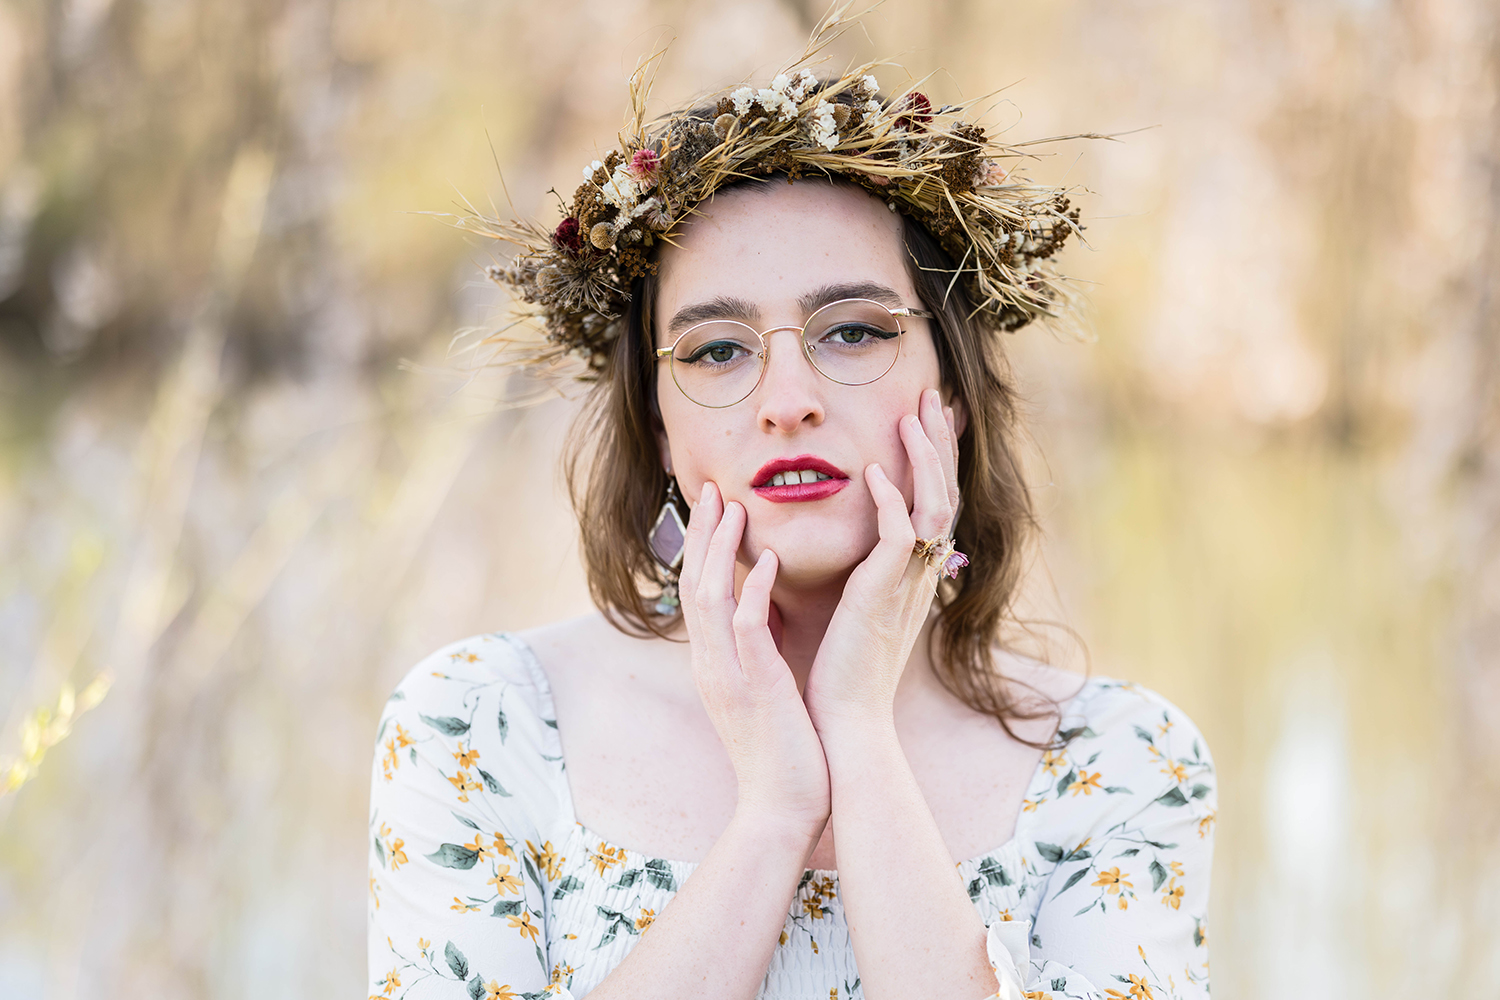 A transwoman wearing a dried flower crown touches her face as she poses for a photo in front of a willow tree.